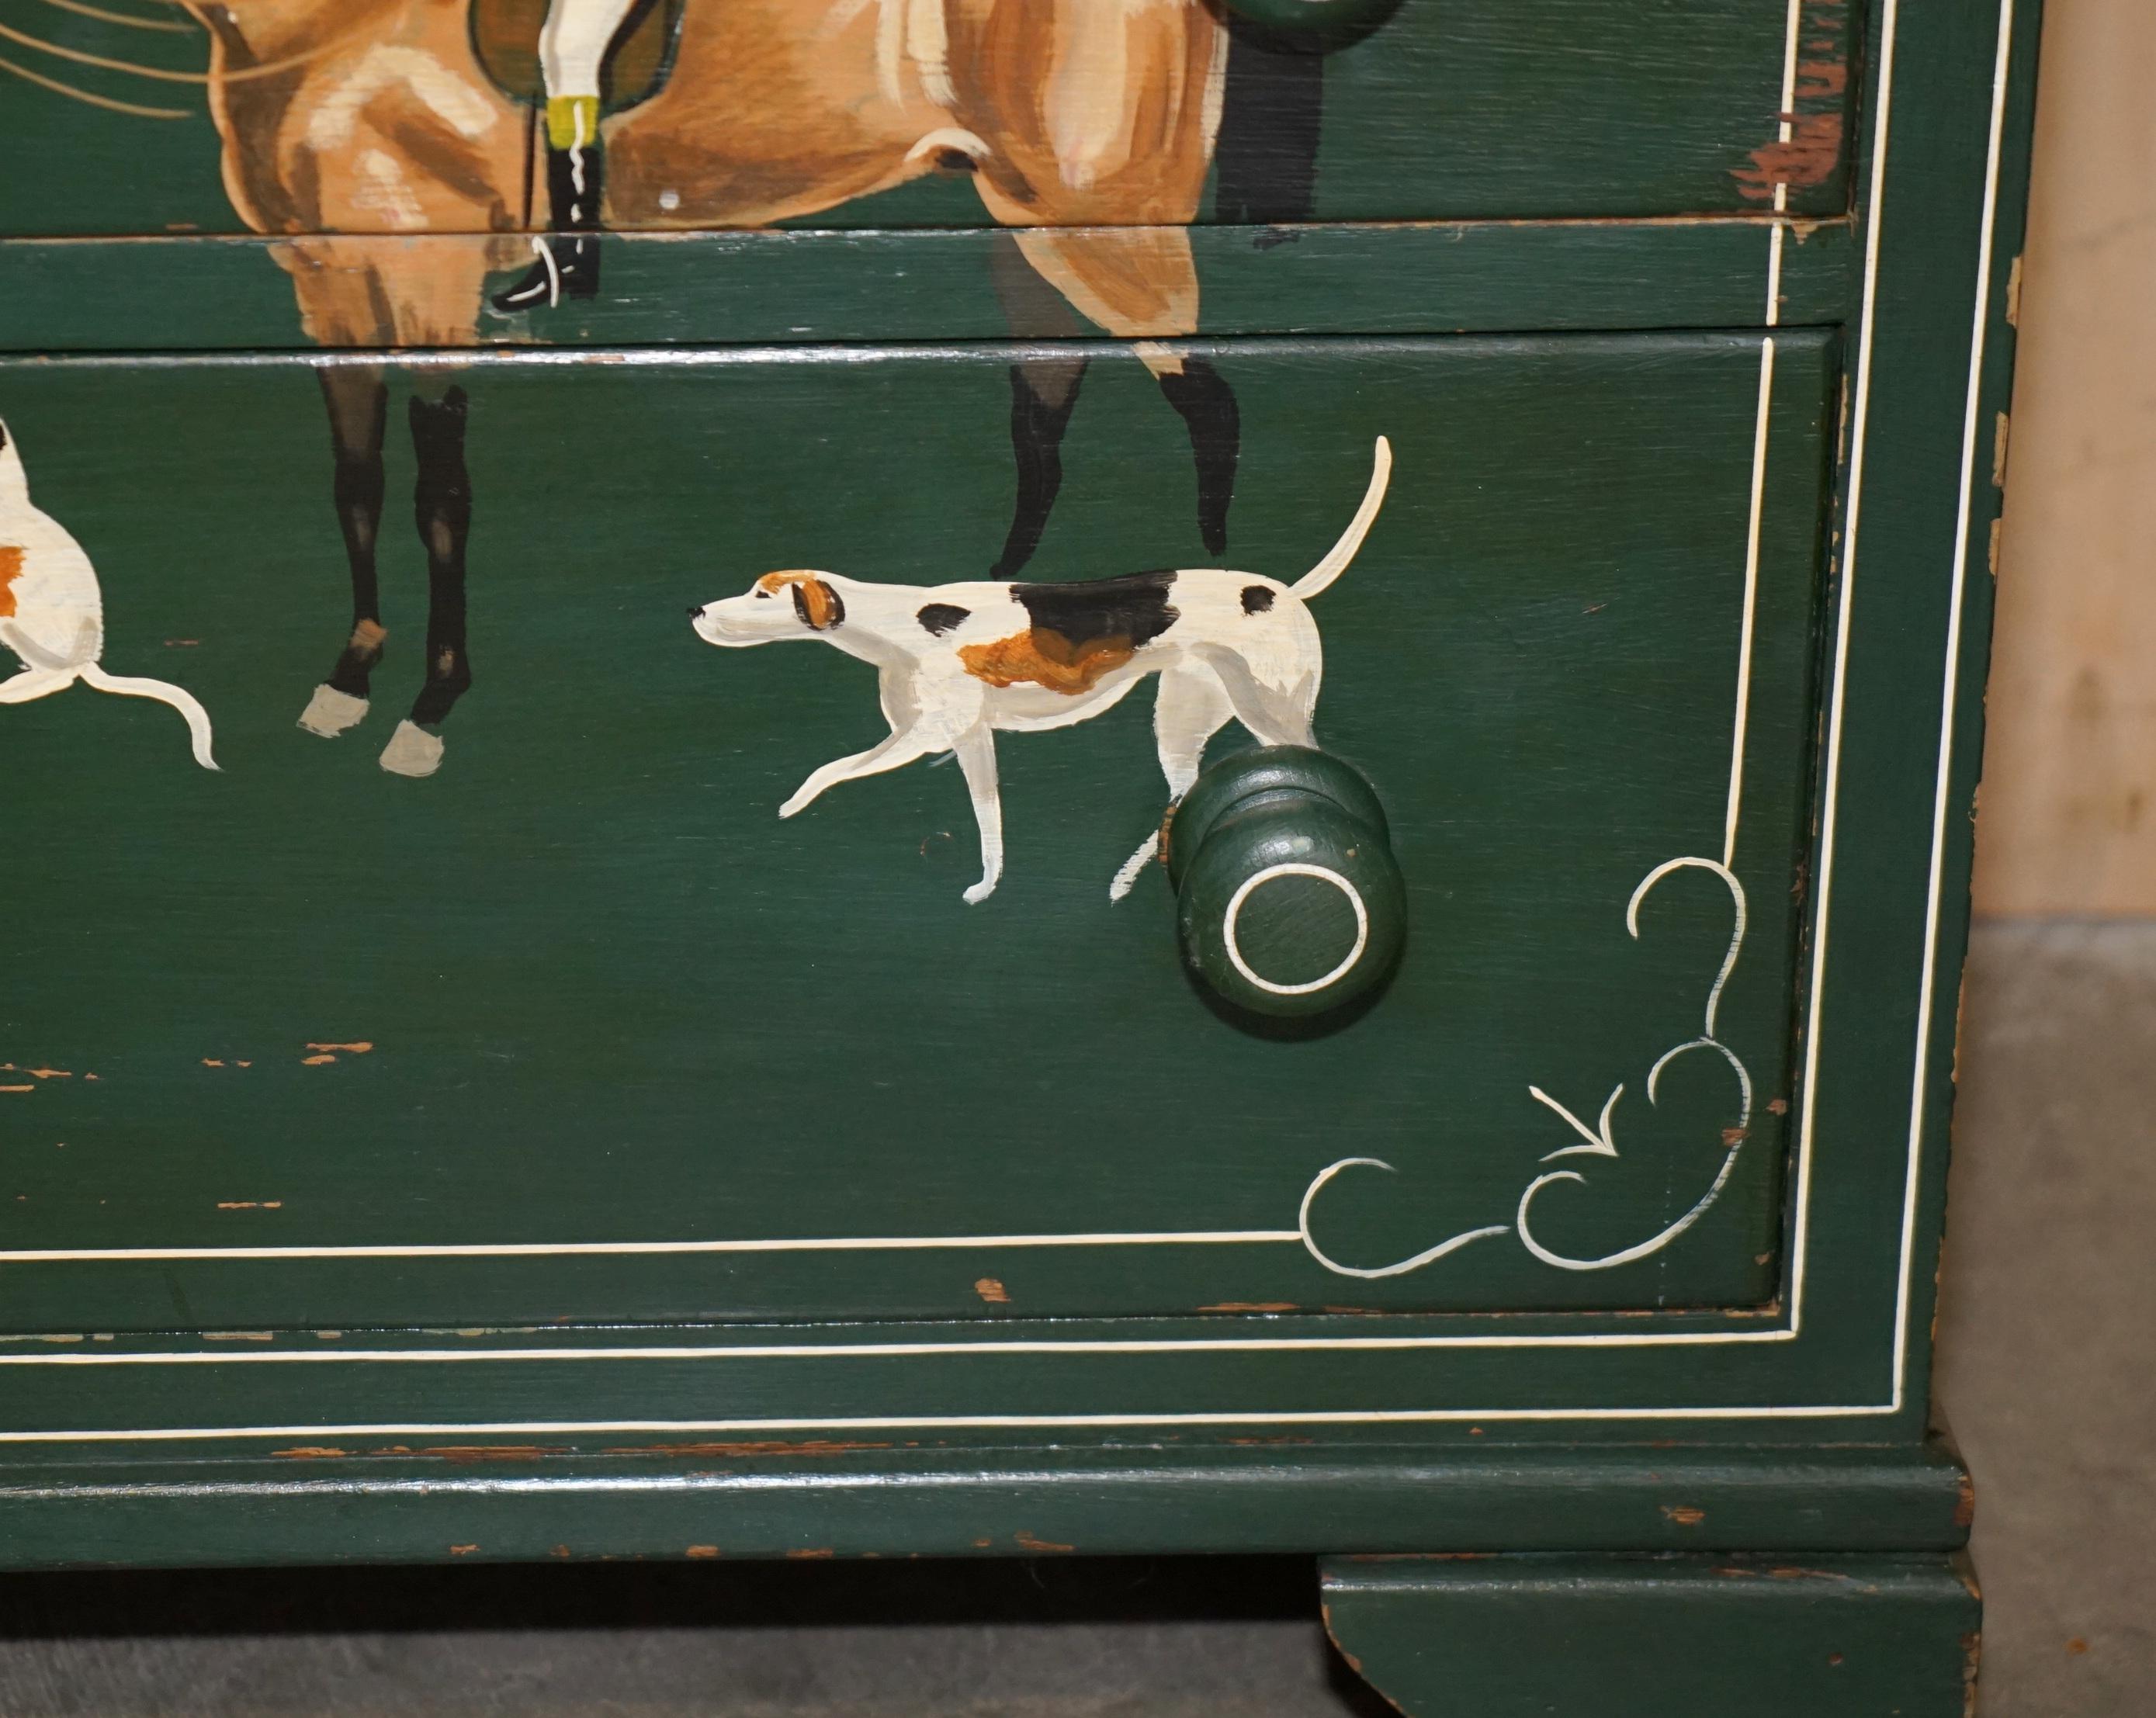 LOVELY ANTiQUE CHEST OF DRAWERS PAINTES EN GREEN DEPICTING HORSE & RIDER CIRCA 1900 en vente 2